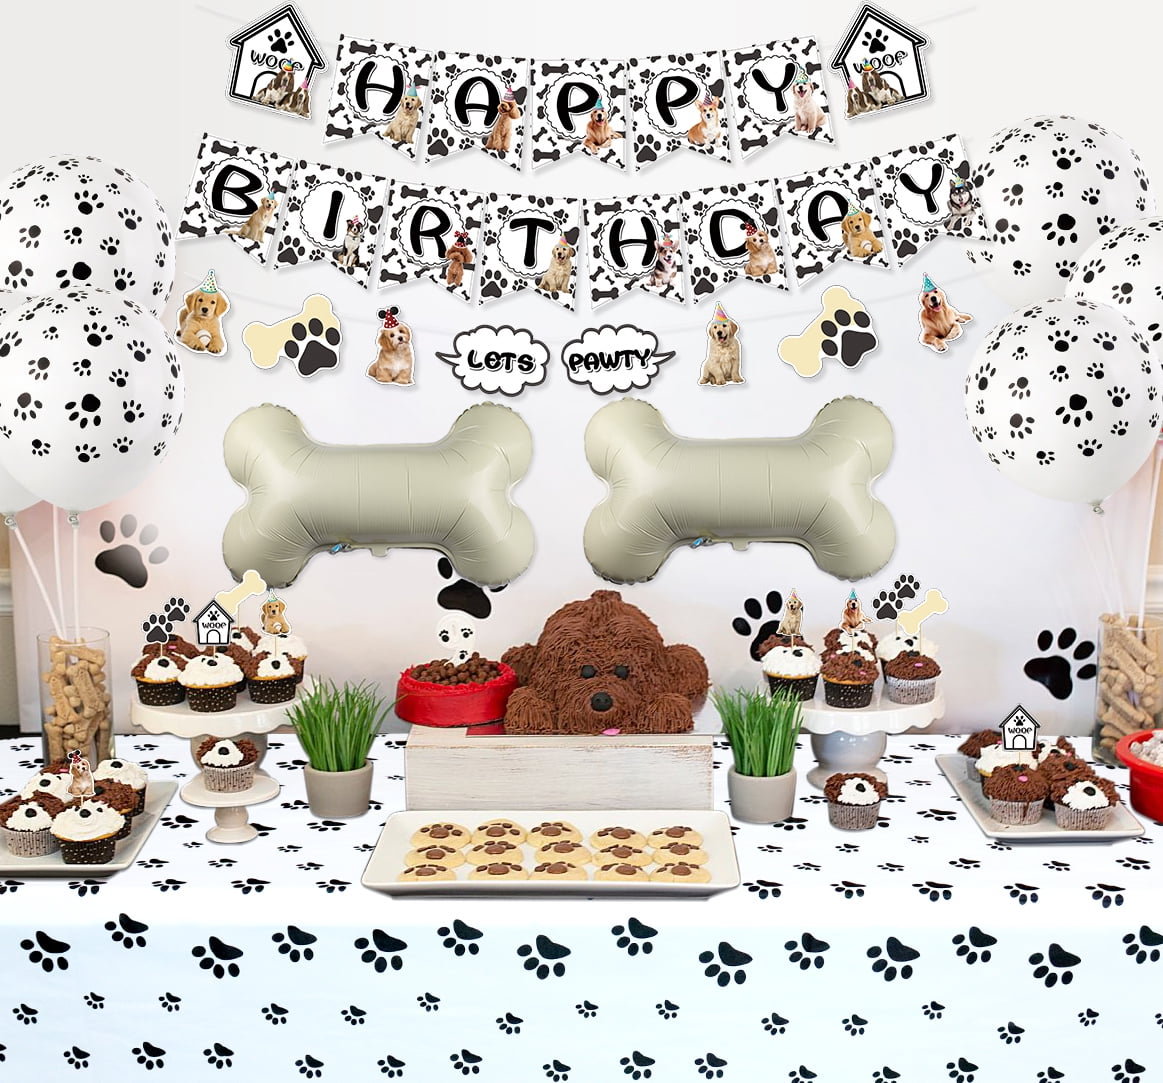 Decorlife DECORLIFE Dog Birthday Party Supplies Serves 16, Cute Puppy  Birthday Party Supplies for kids Includes Dog Party Decorations, Pap